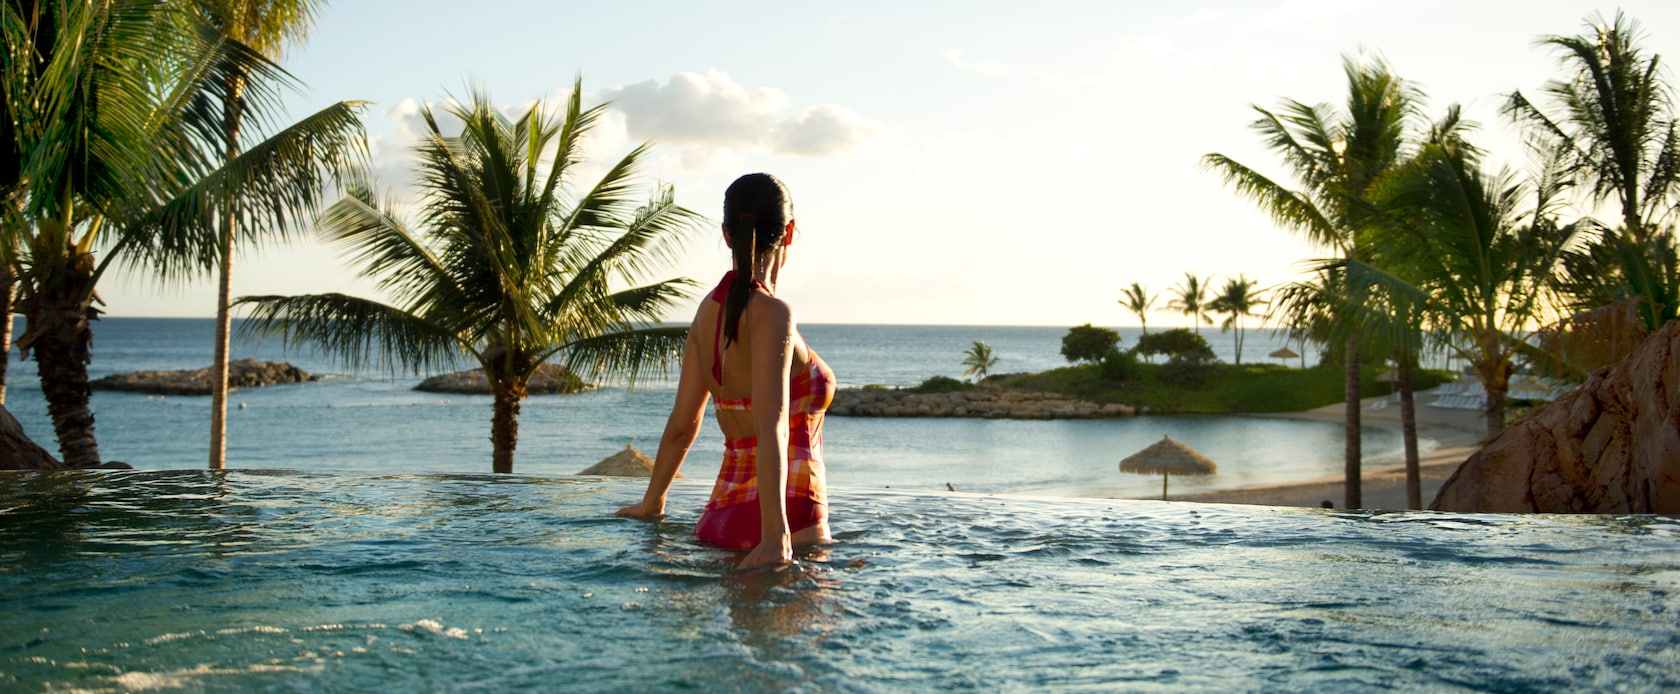 A bathing suit-clad female guest enjoys a whirlpool spa while gazing at the clouds above the ocean